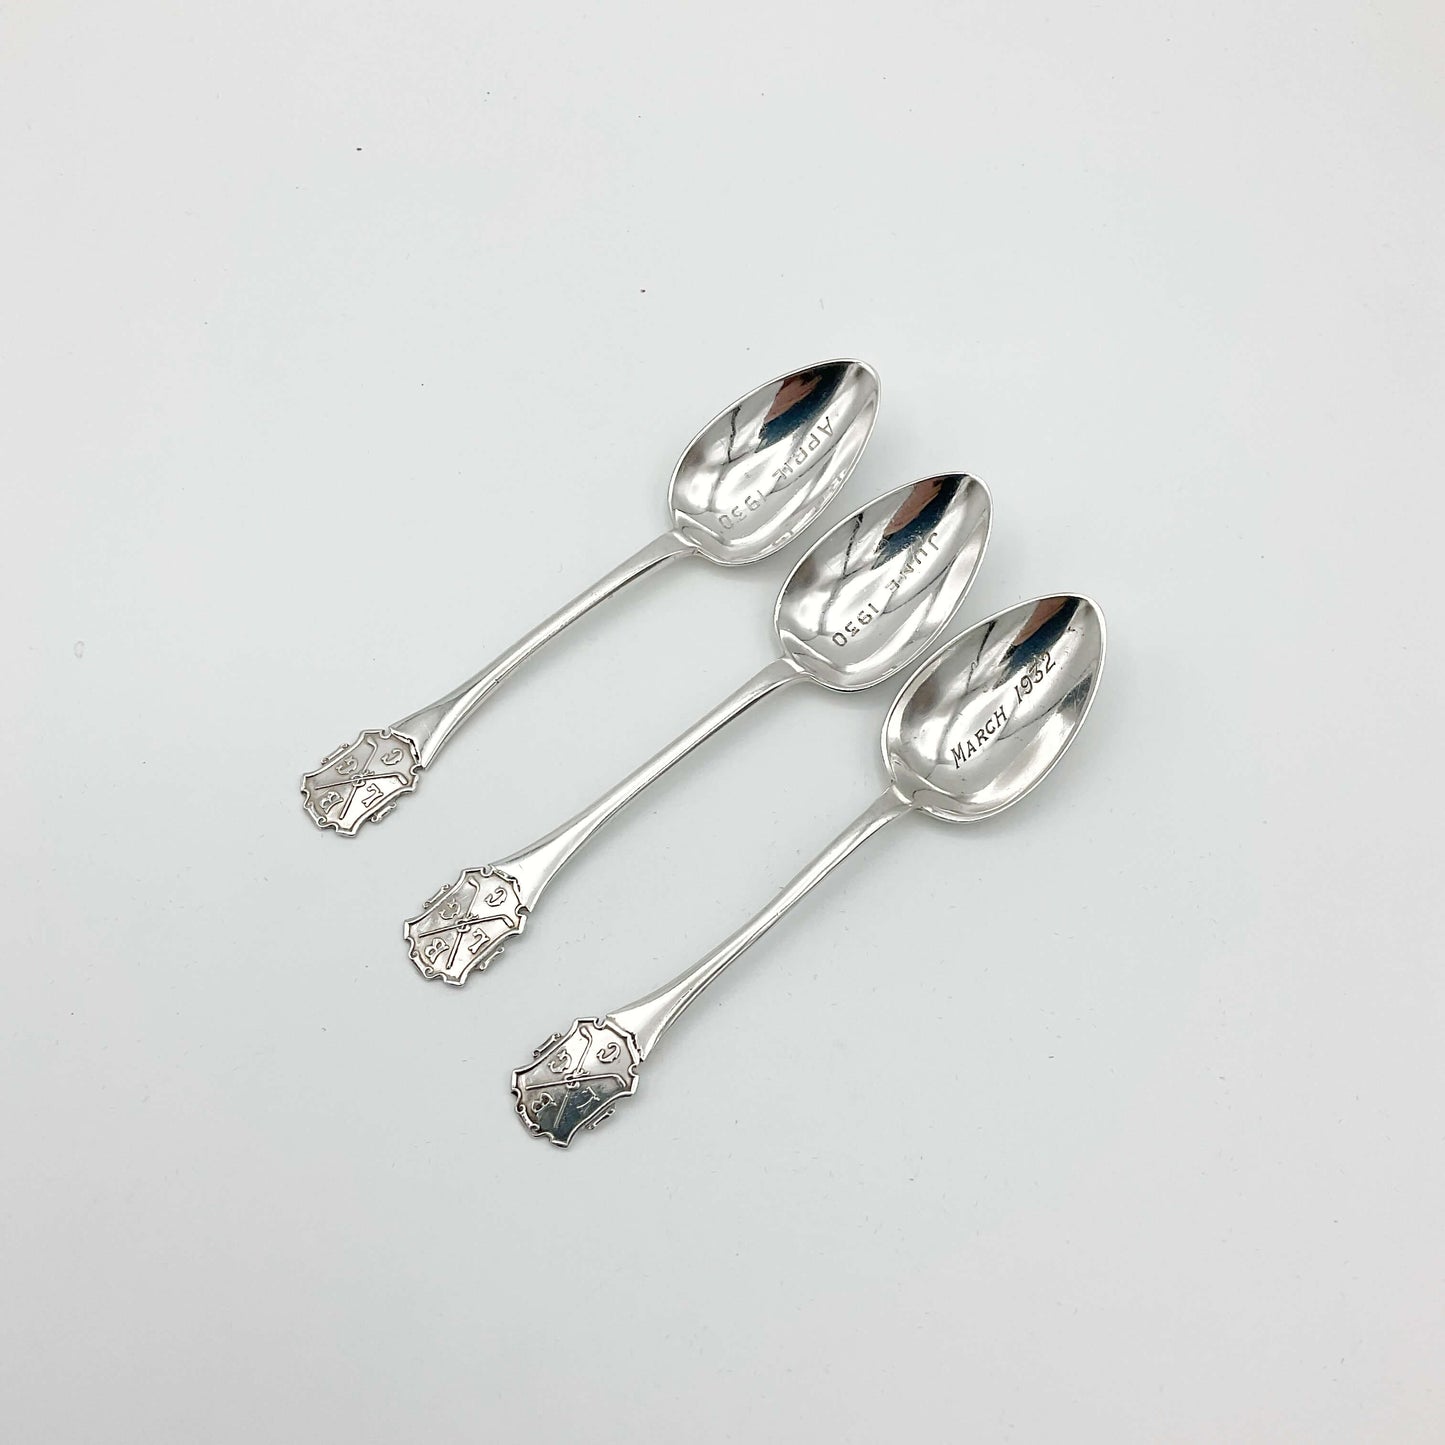 Three coffee spoons with 1930s dates in the bowls and BLGC logos on the handles